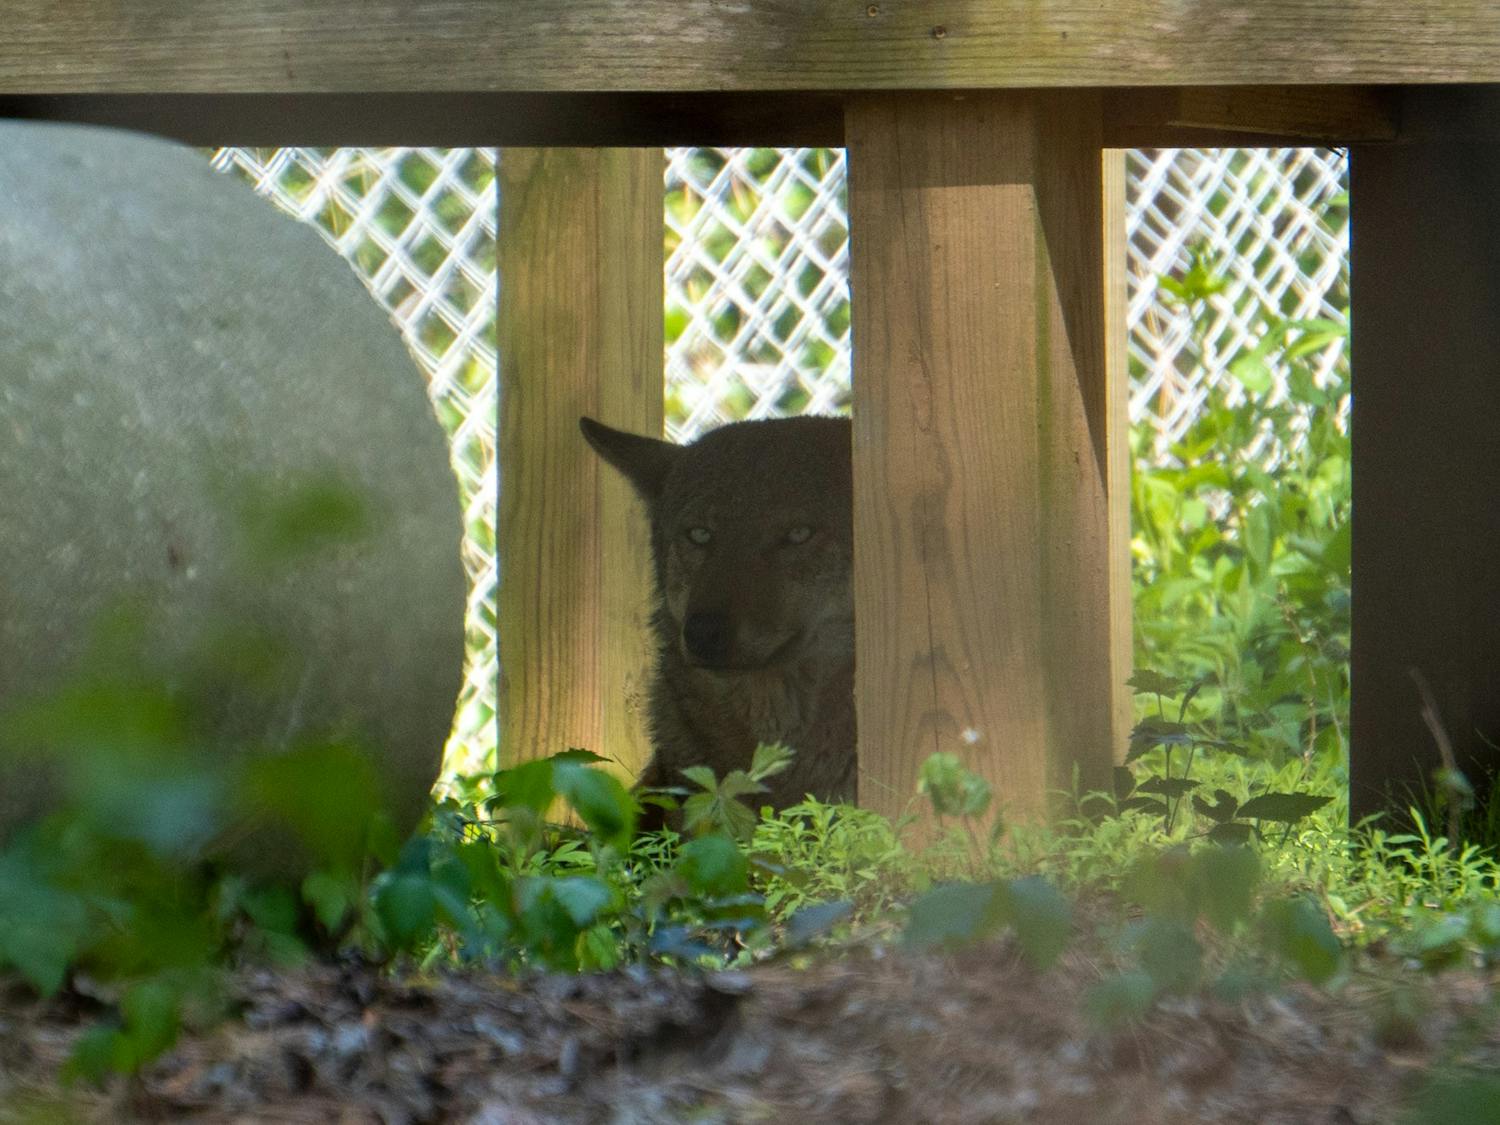 A red wolf rests in the shade in an enclosure at the Carolina Tiger Rescue on Wednesday, April 20, 2022.